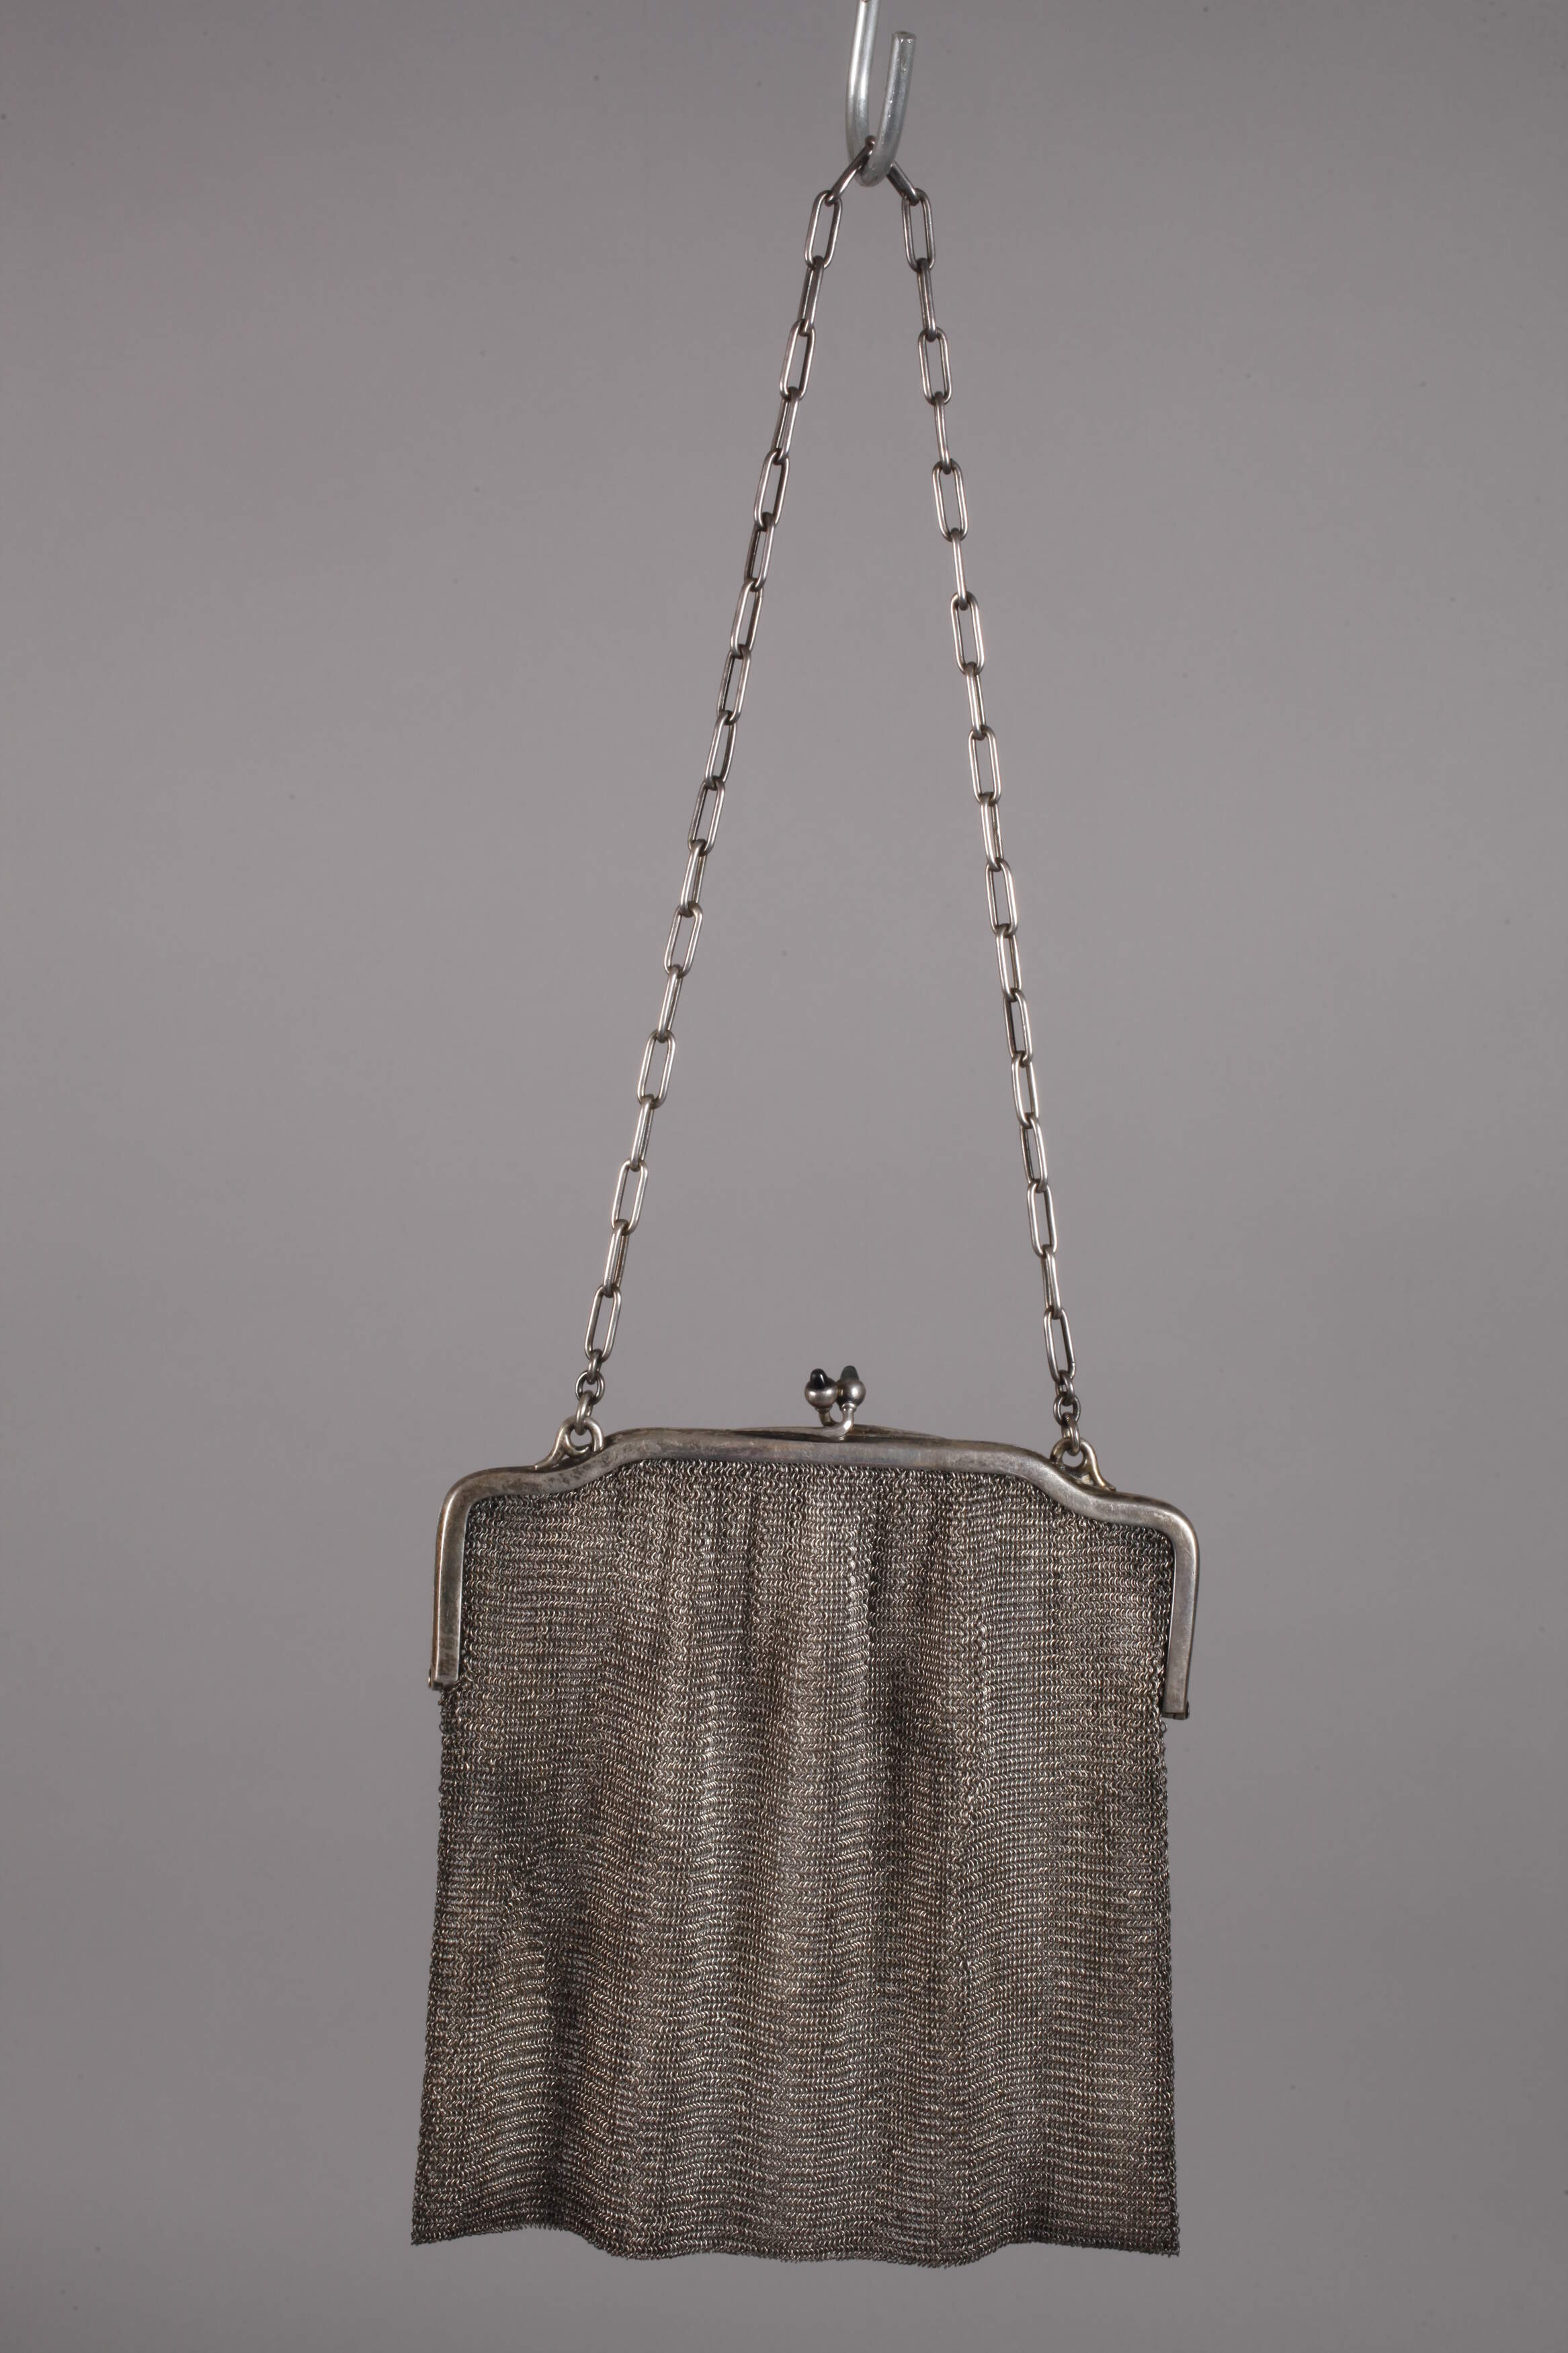 Silver evening bag - Image 2 of 3